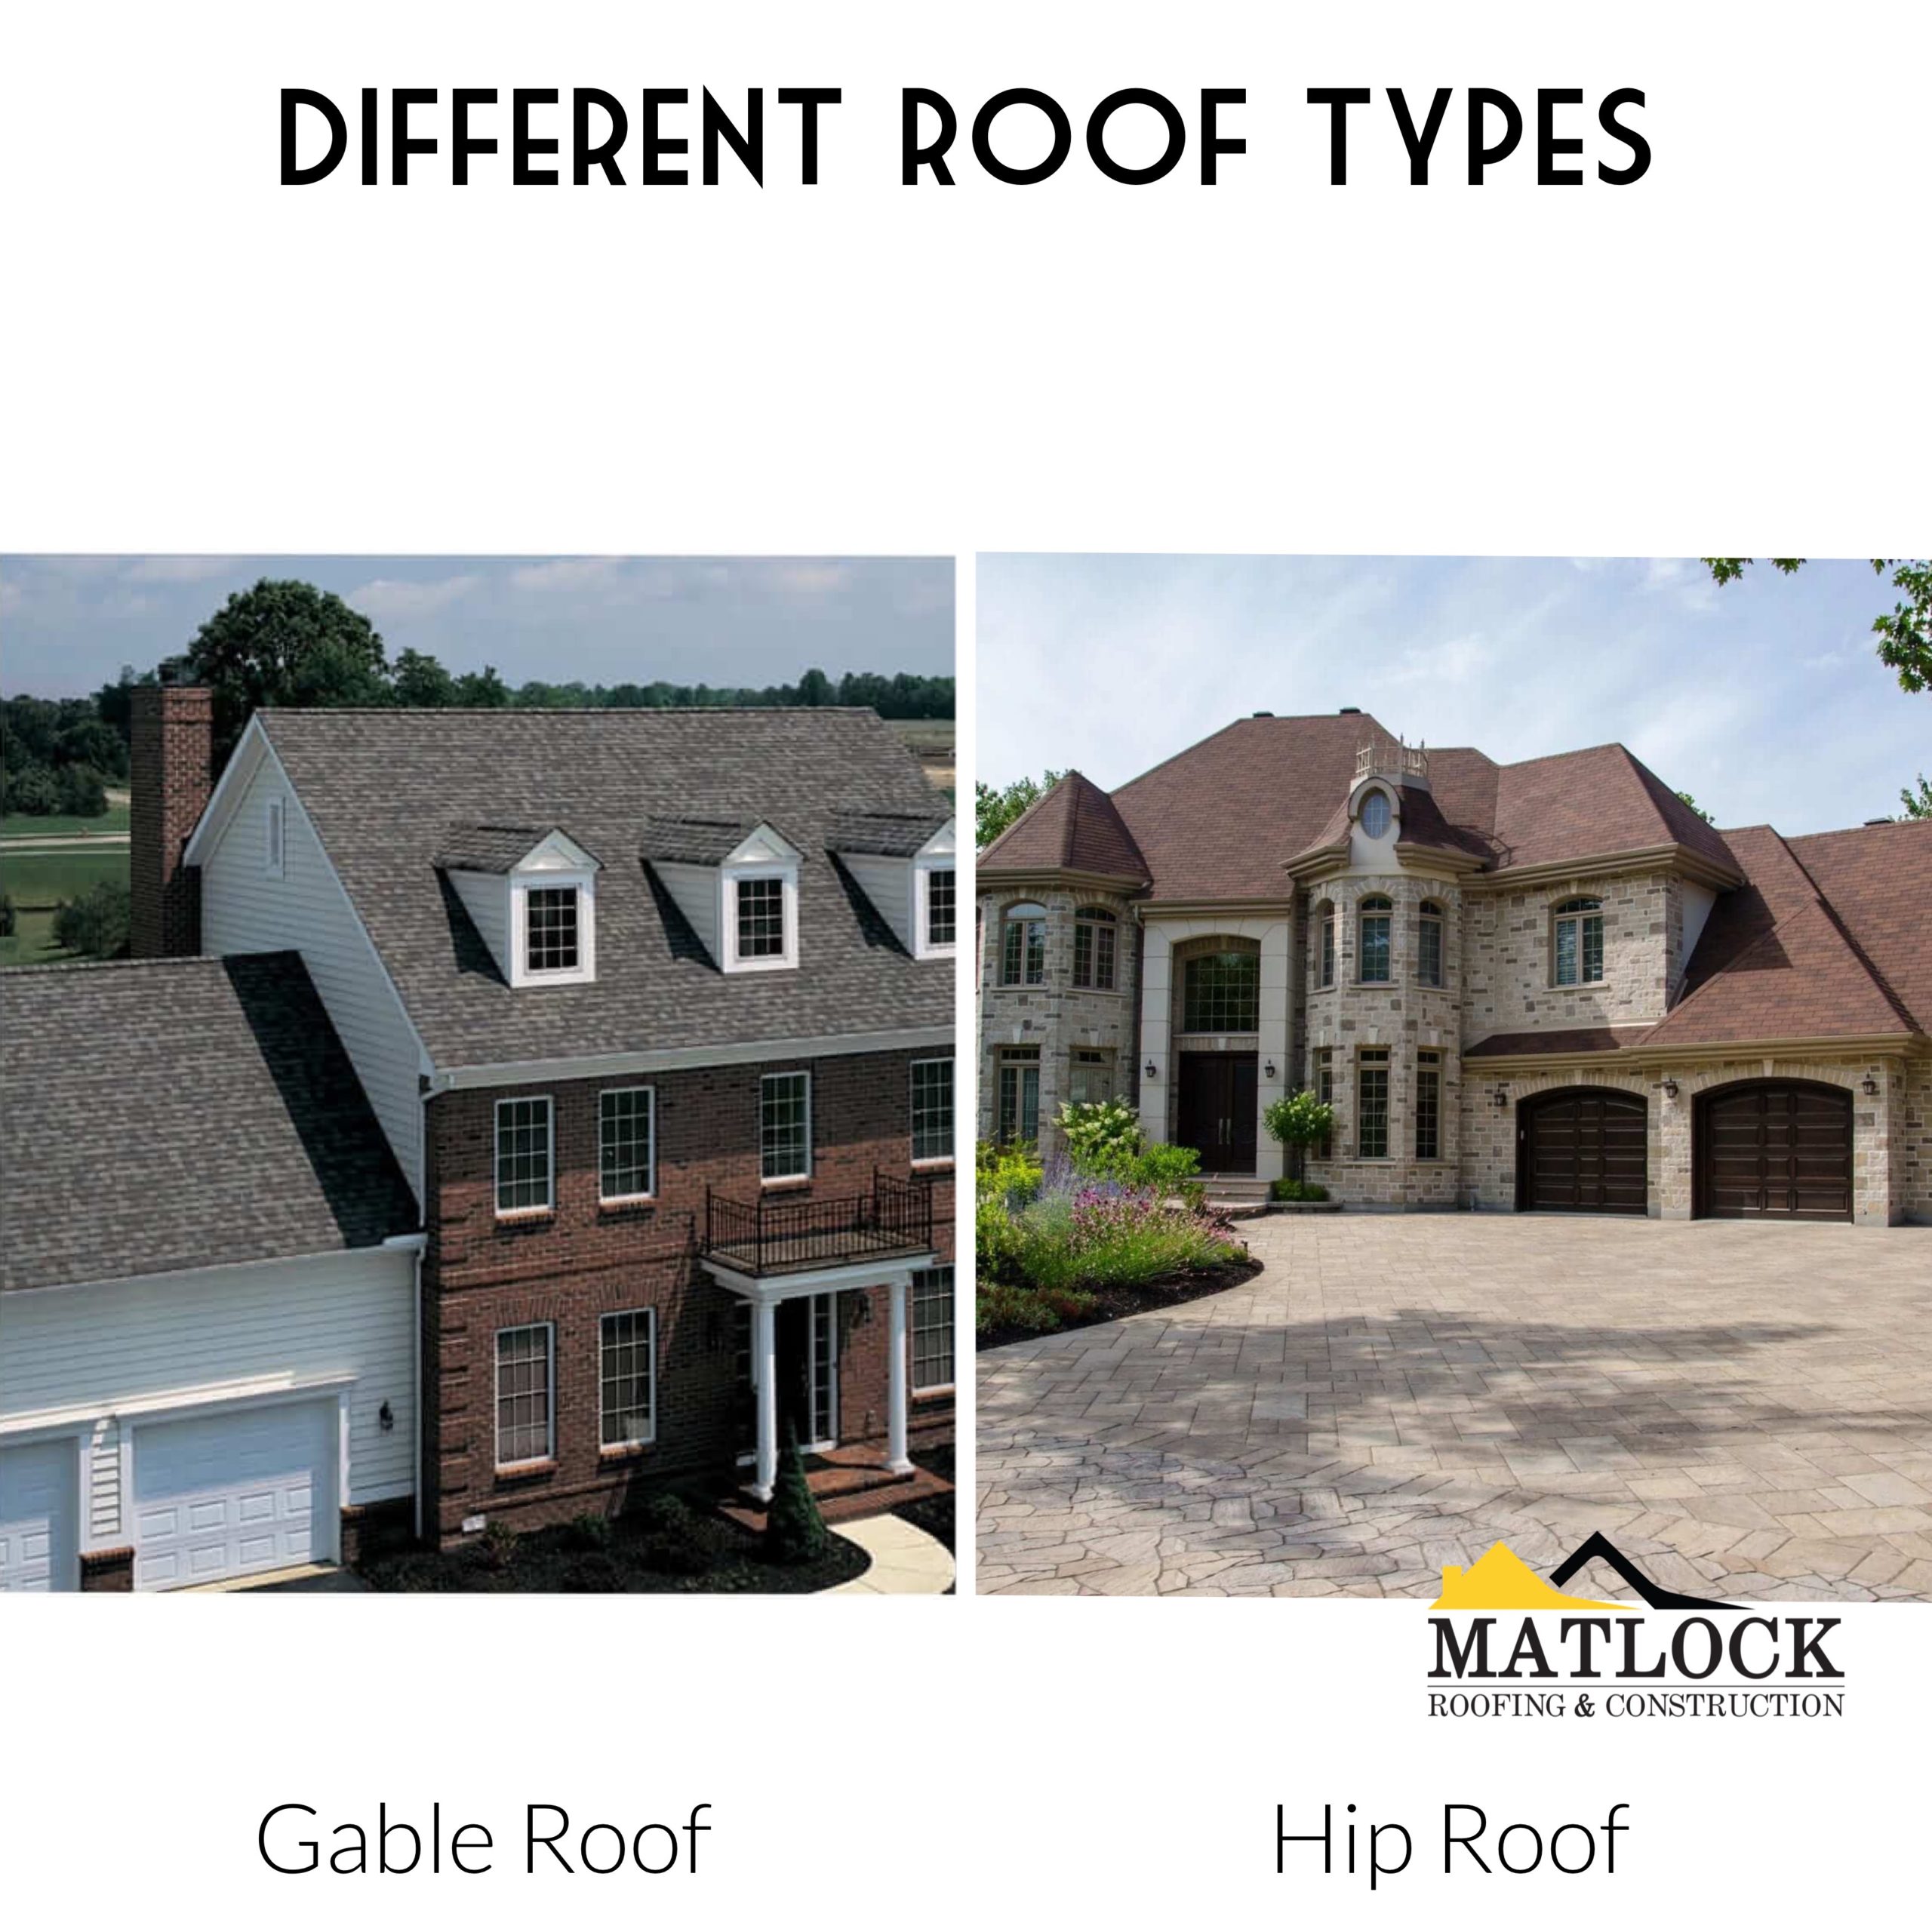 Gable vs Hip by houses Matlock Roofing has reroofed